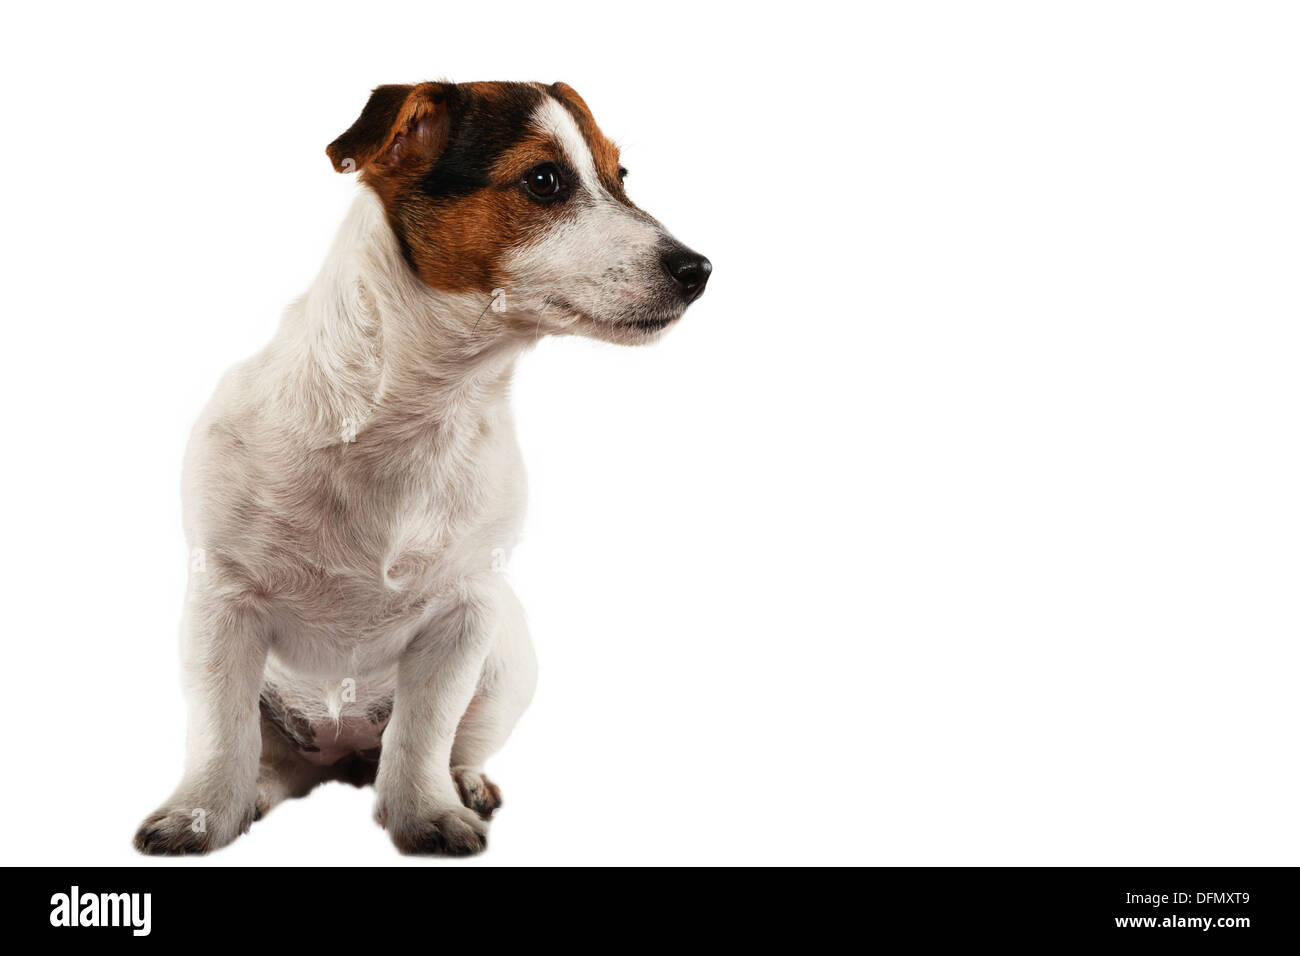 A young Jack Russell Terrier on a white background Stock Photo